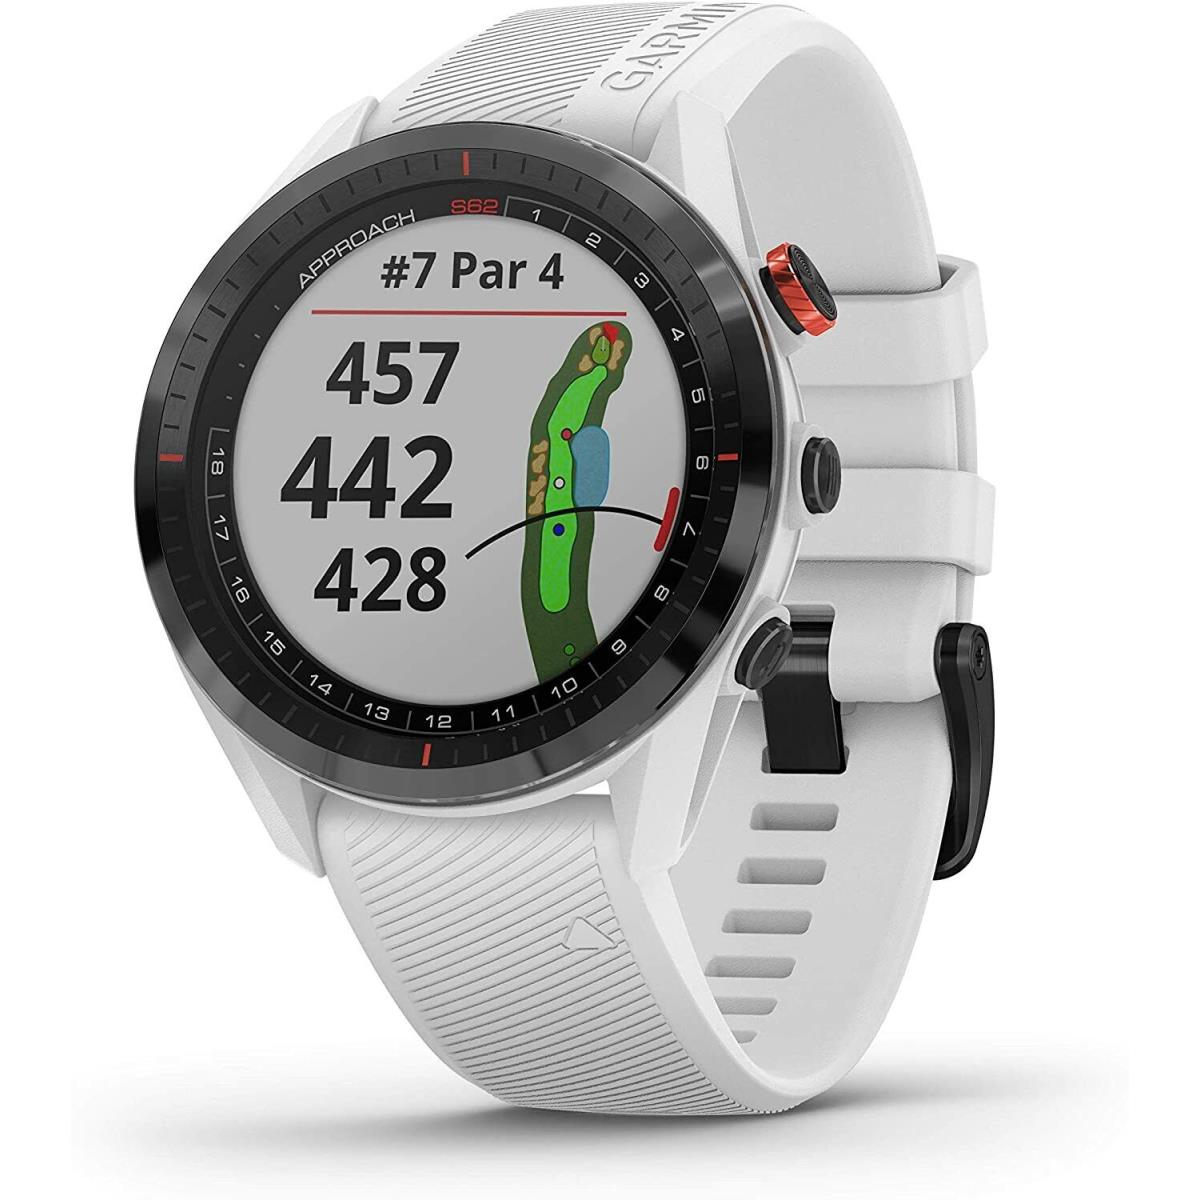 Garmin Approach S62 Premium Gps Golf Watch - Black bezel and silicone band/ watch only